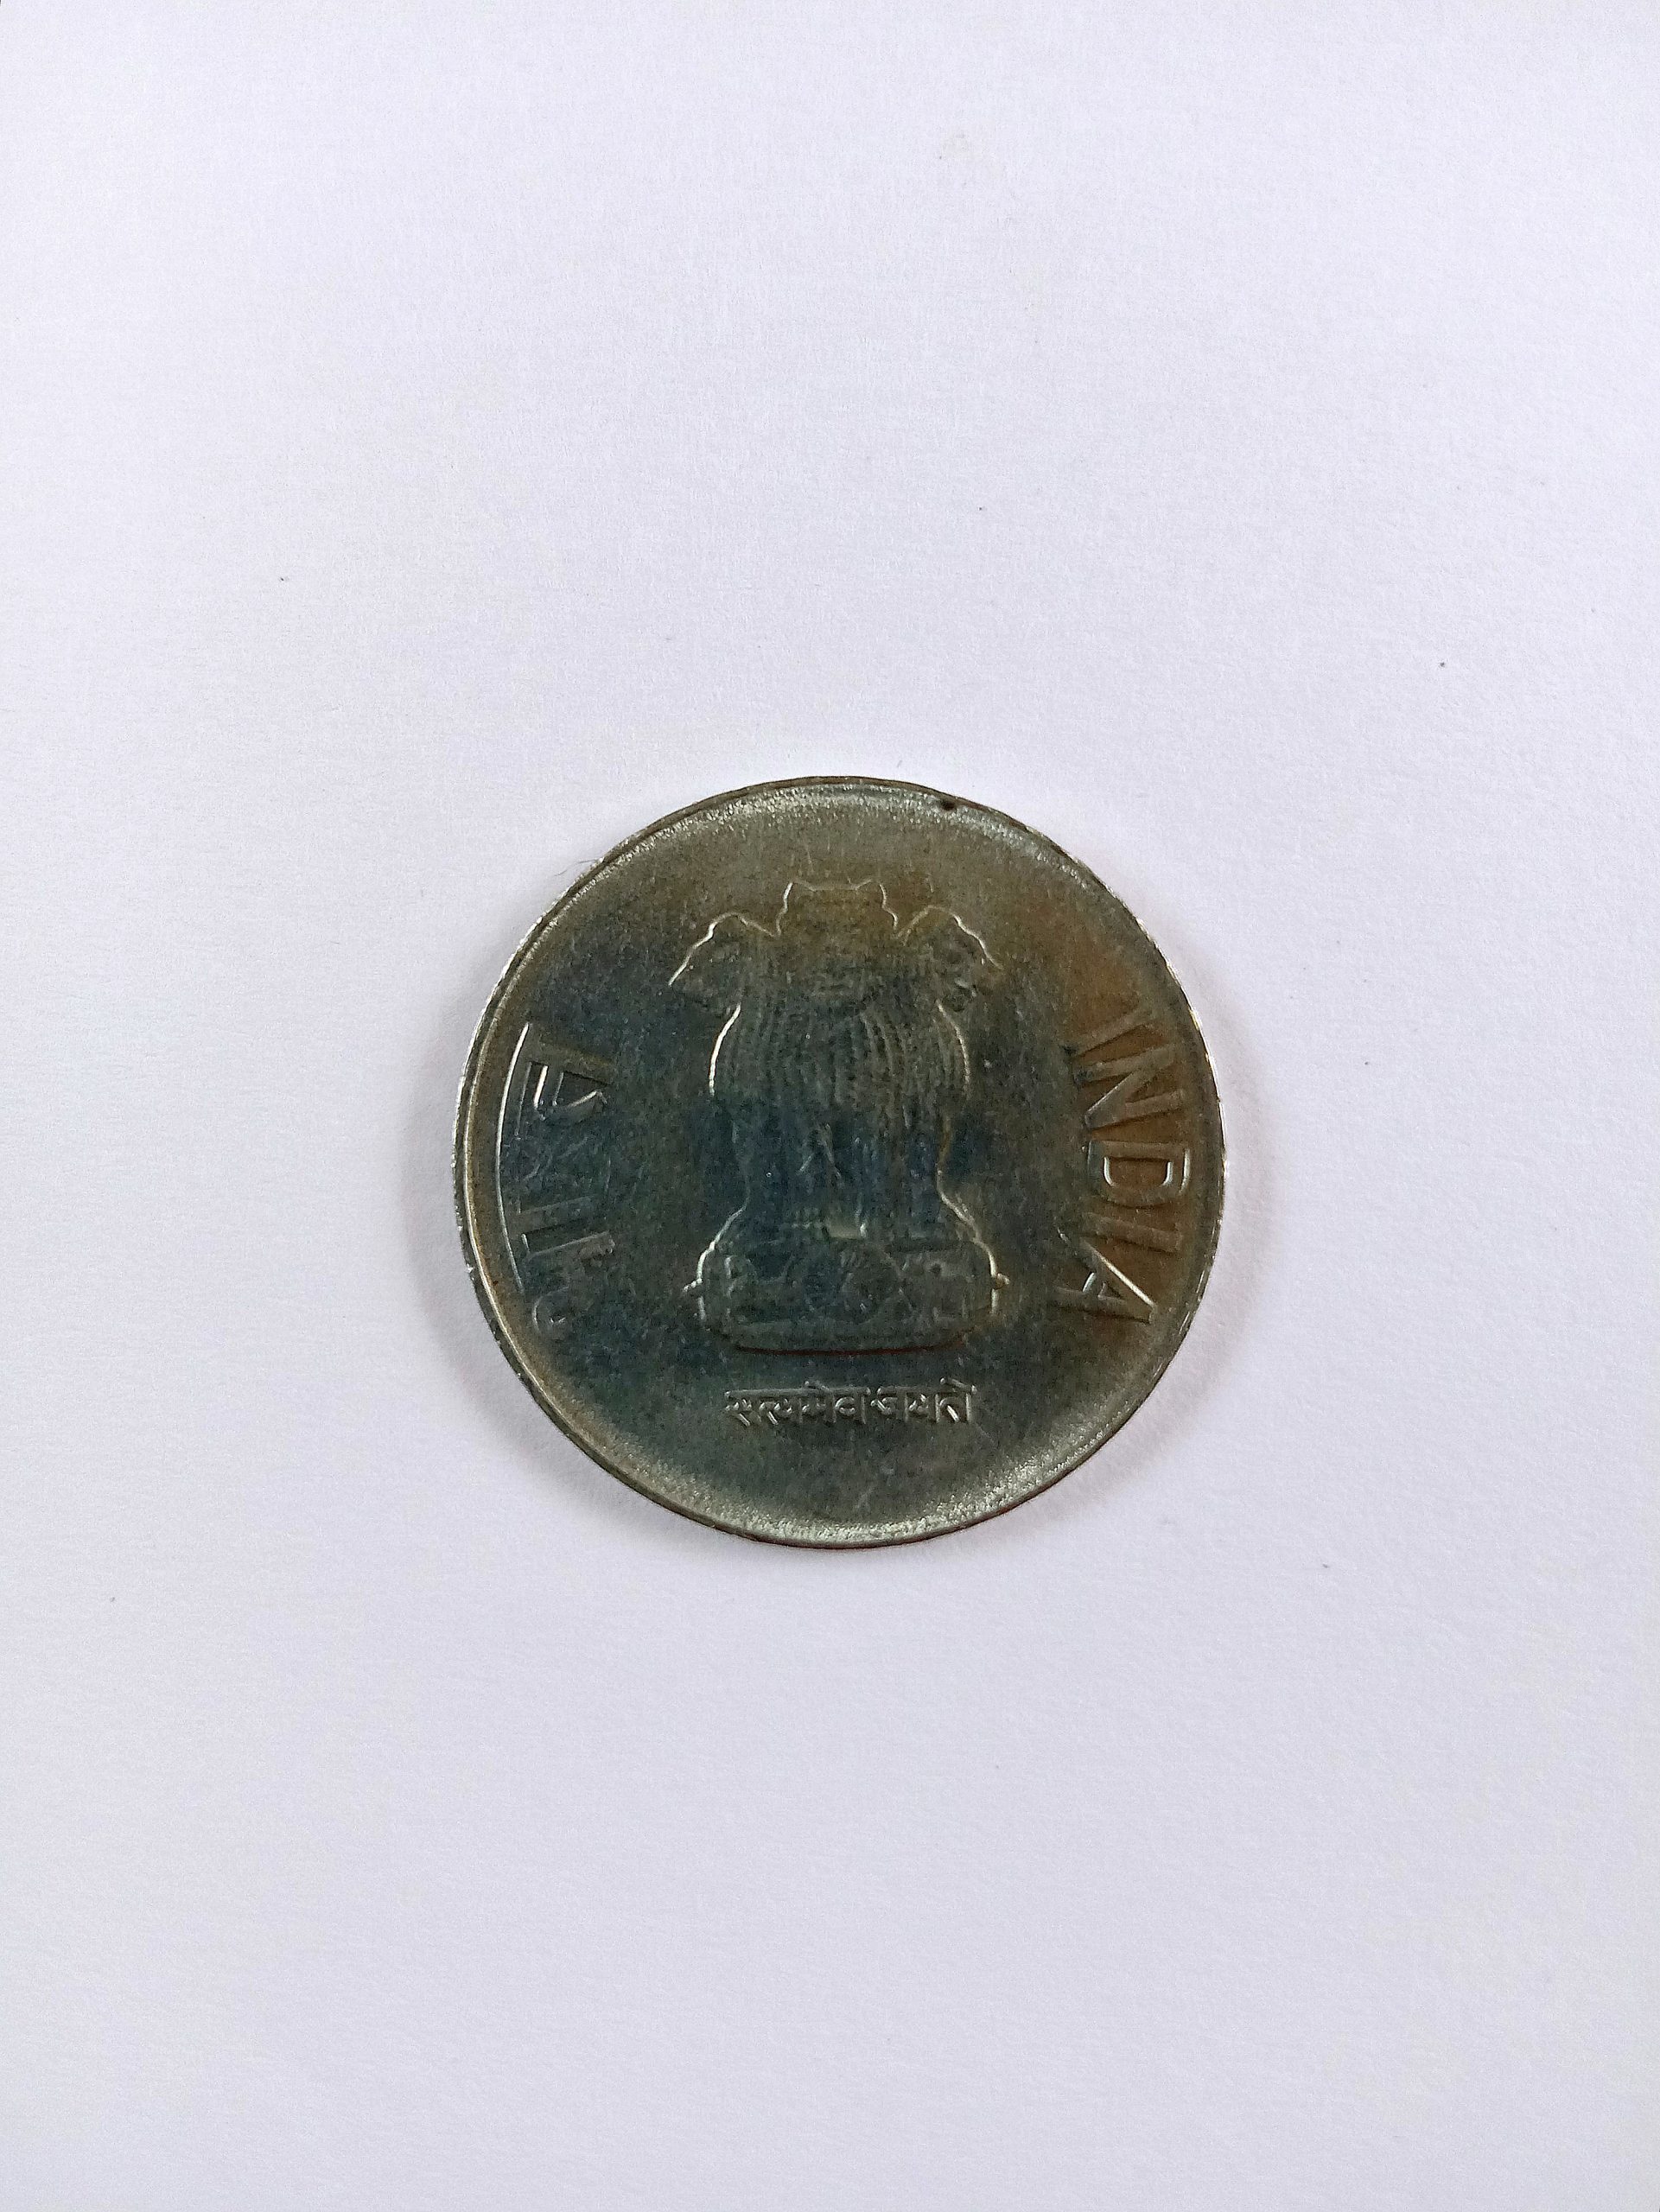 Indian one rupee coin